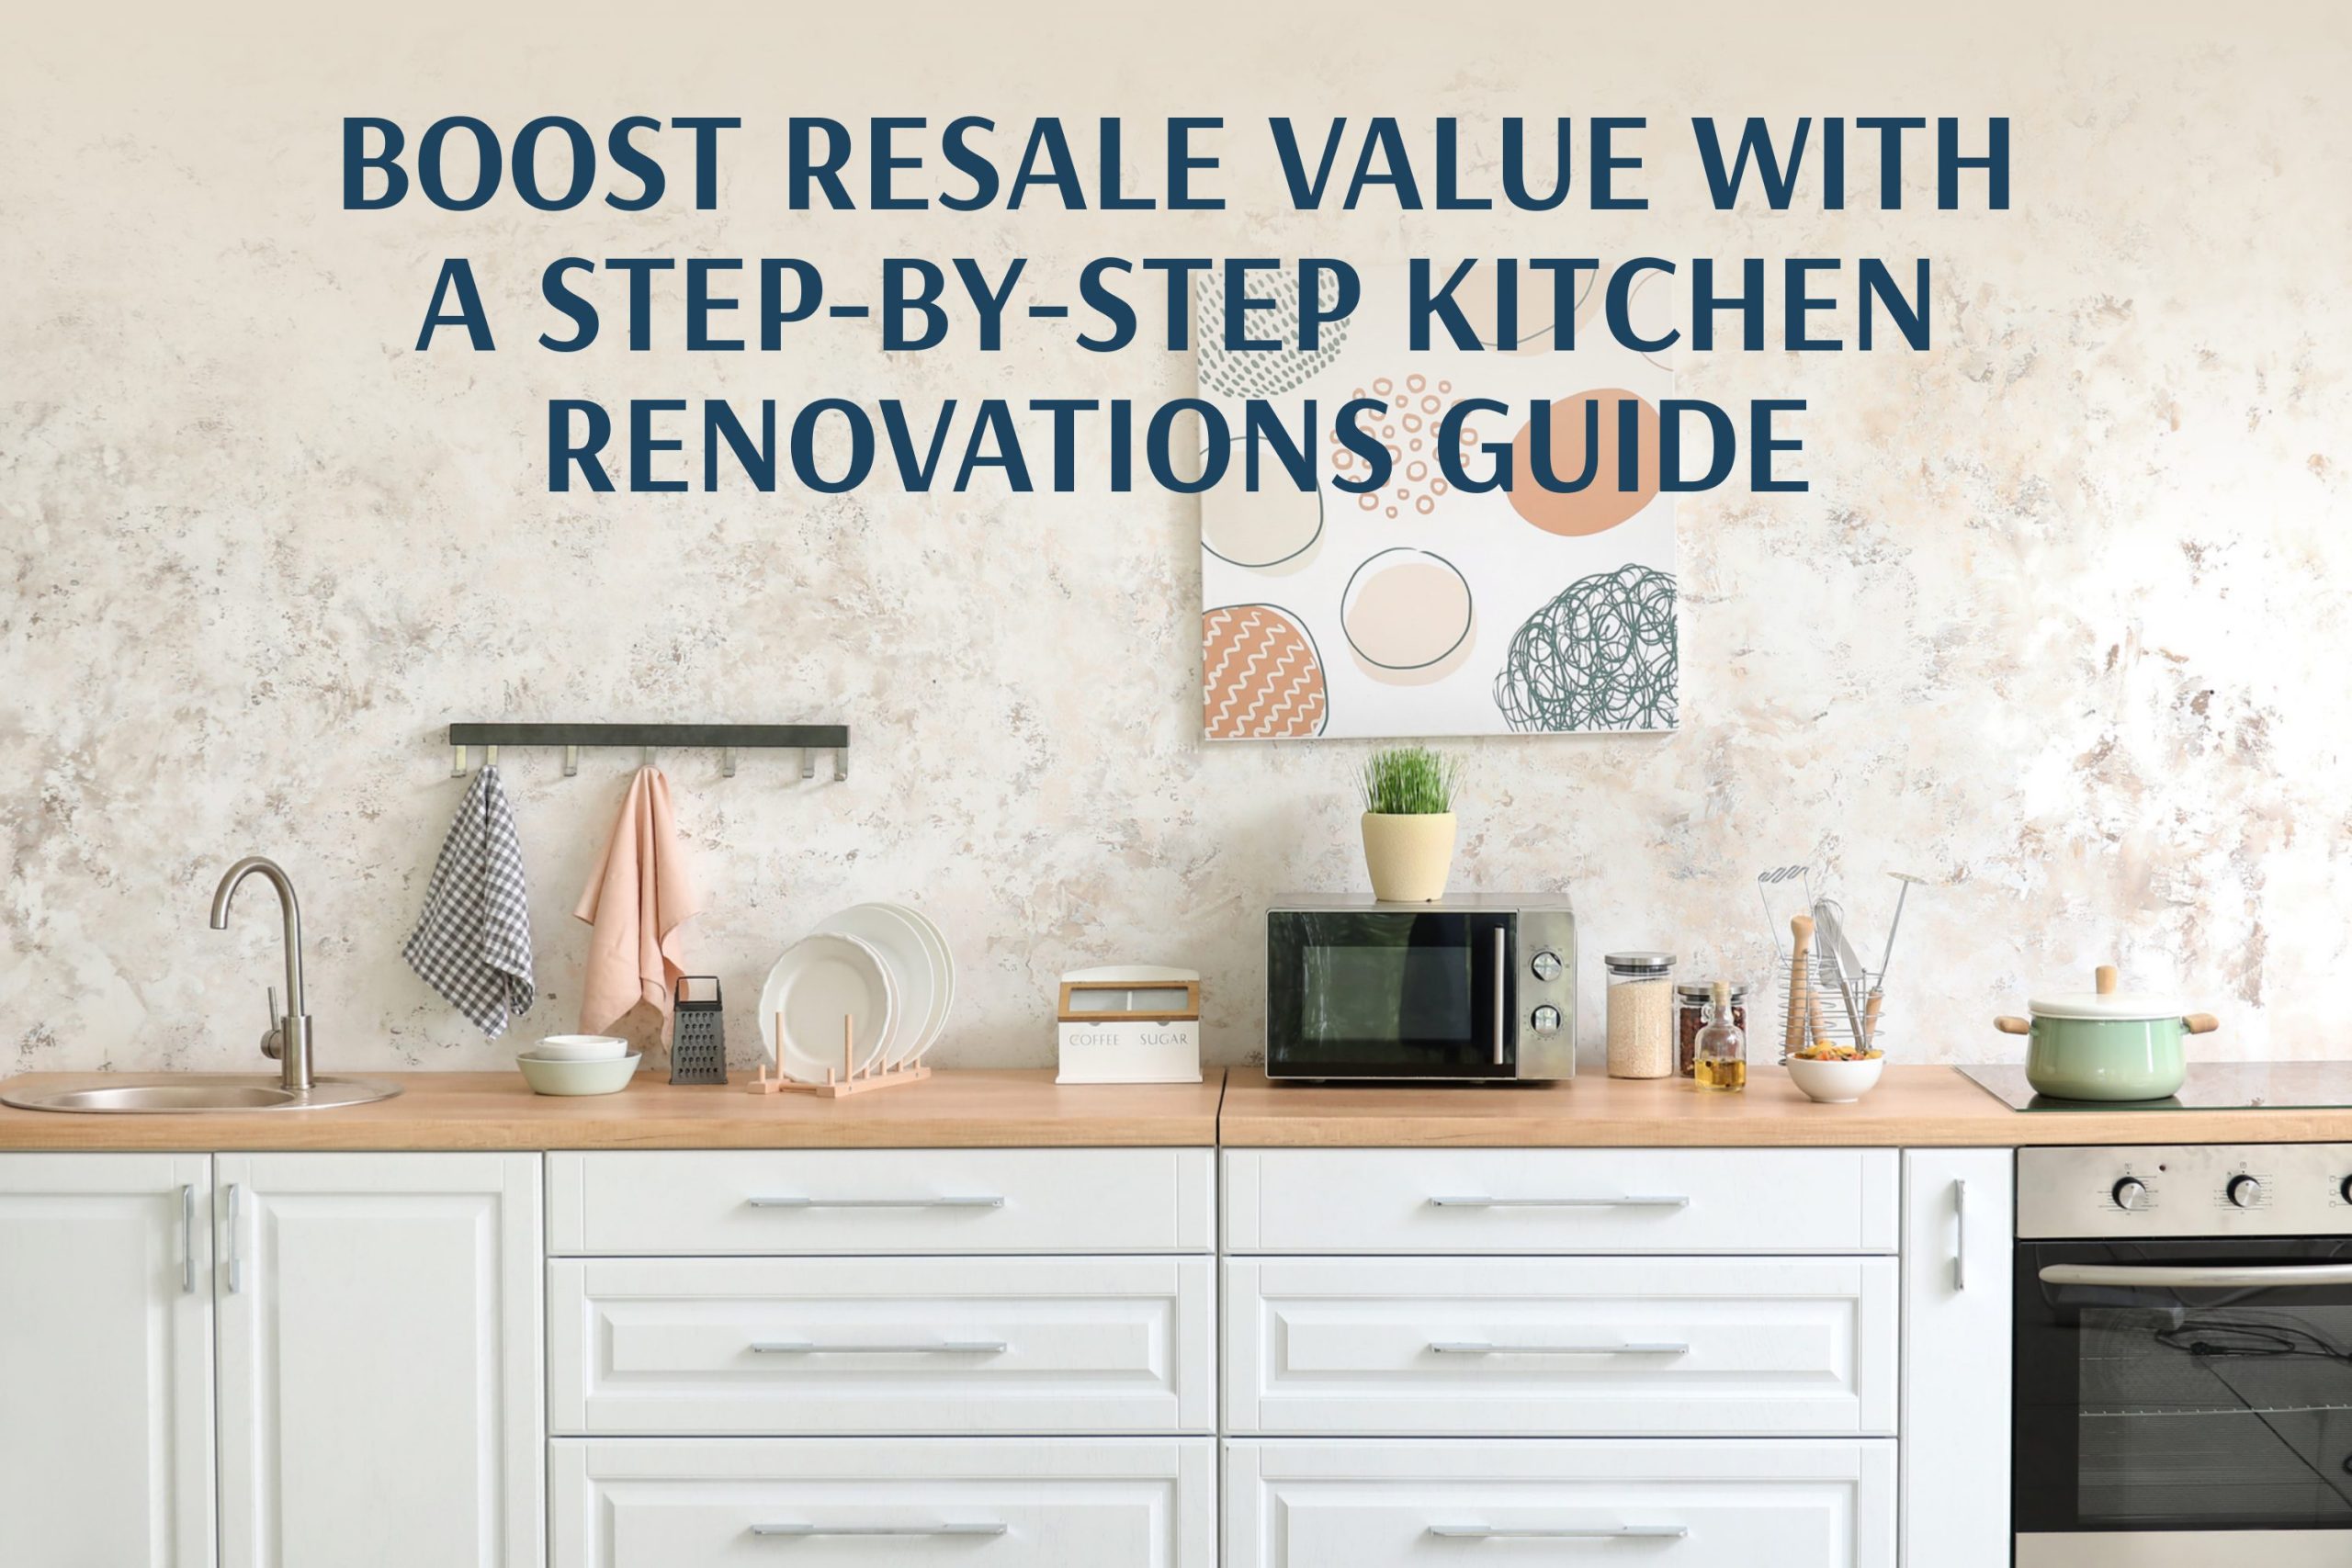 Boost Resale Value with a Step-by-Step Kitchen Renovations Guide